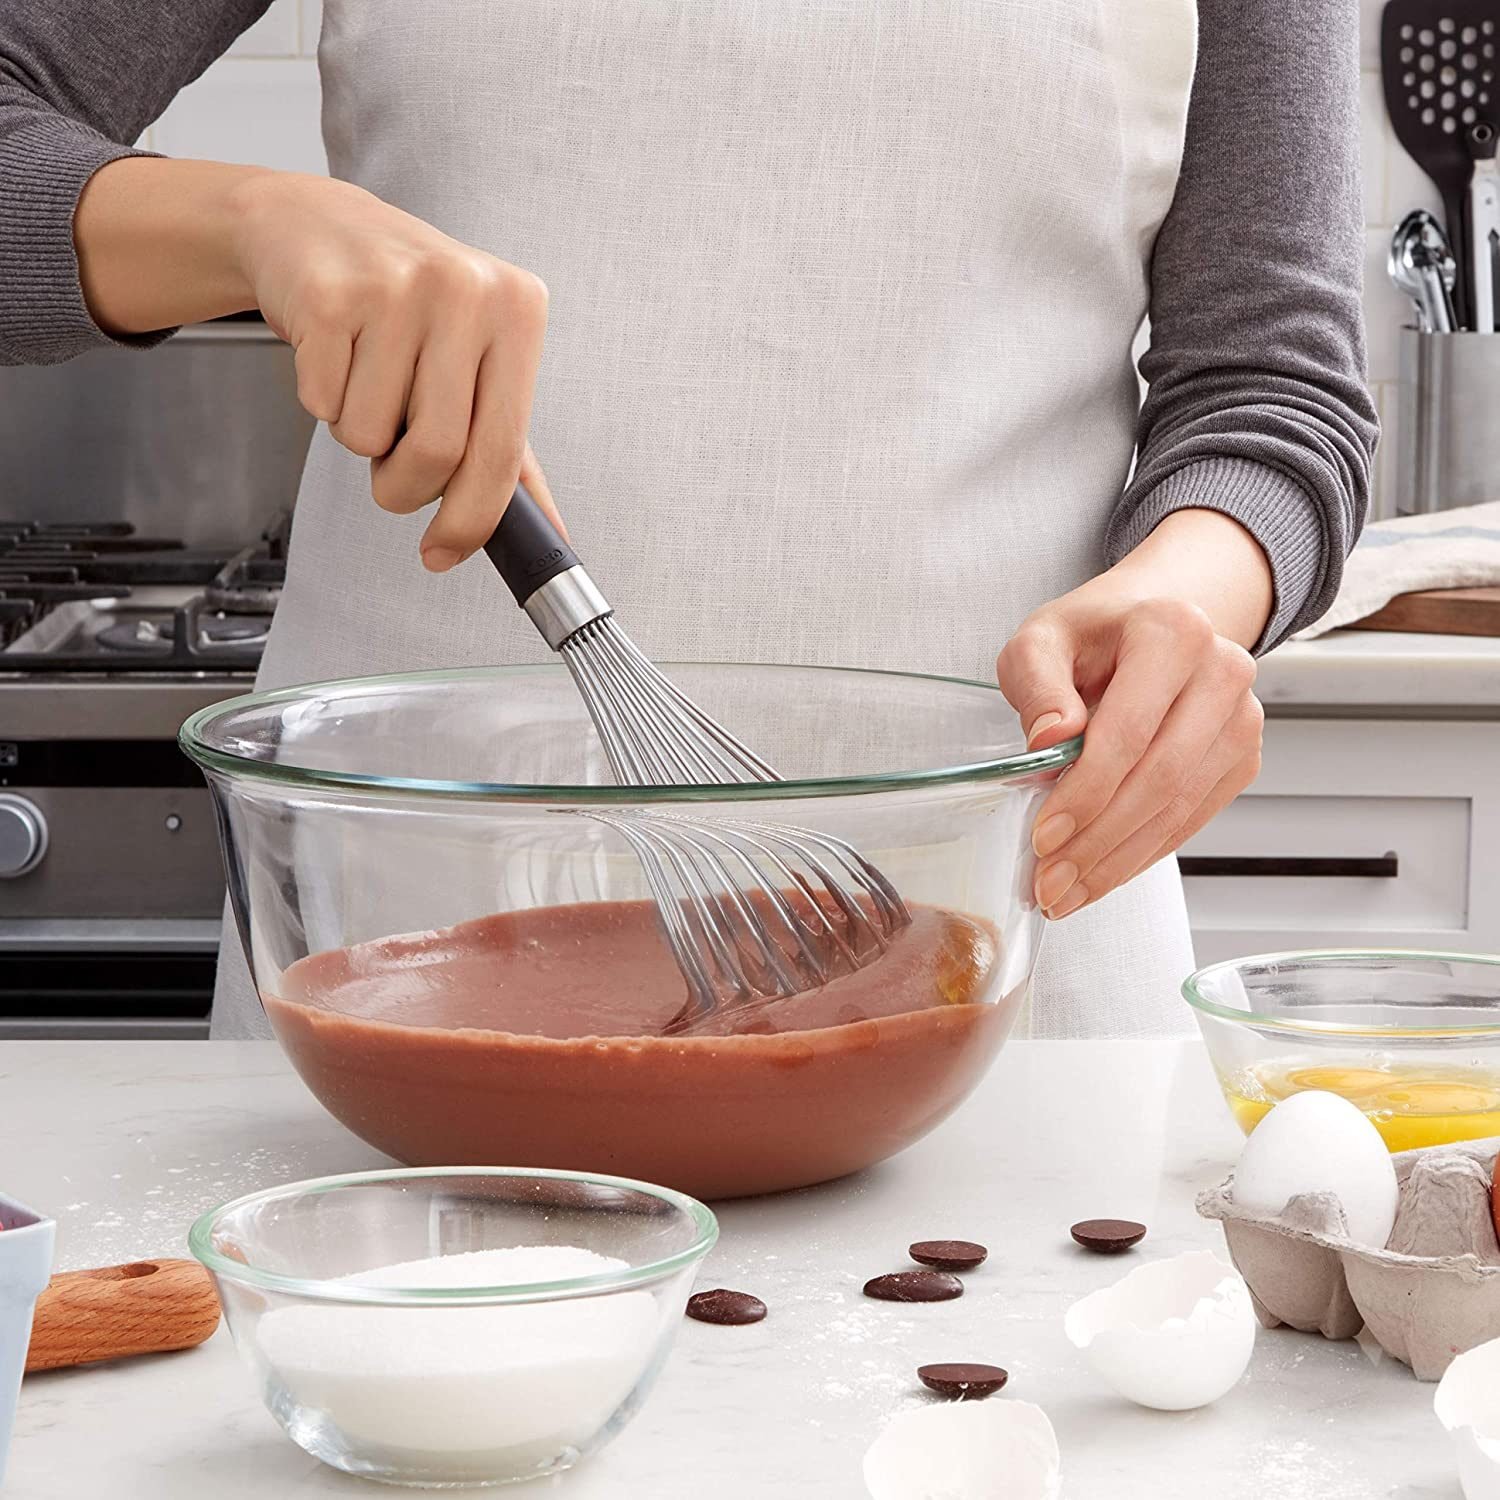 10 cool kitchen gadgets to help you cook like a chef